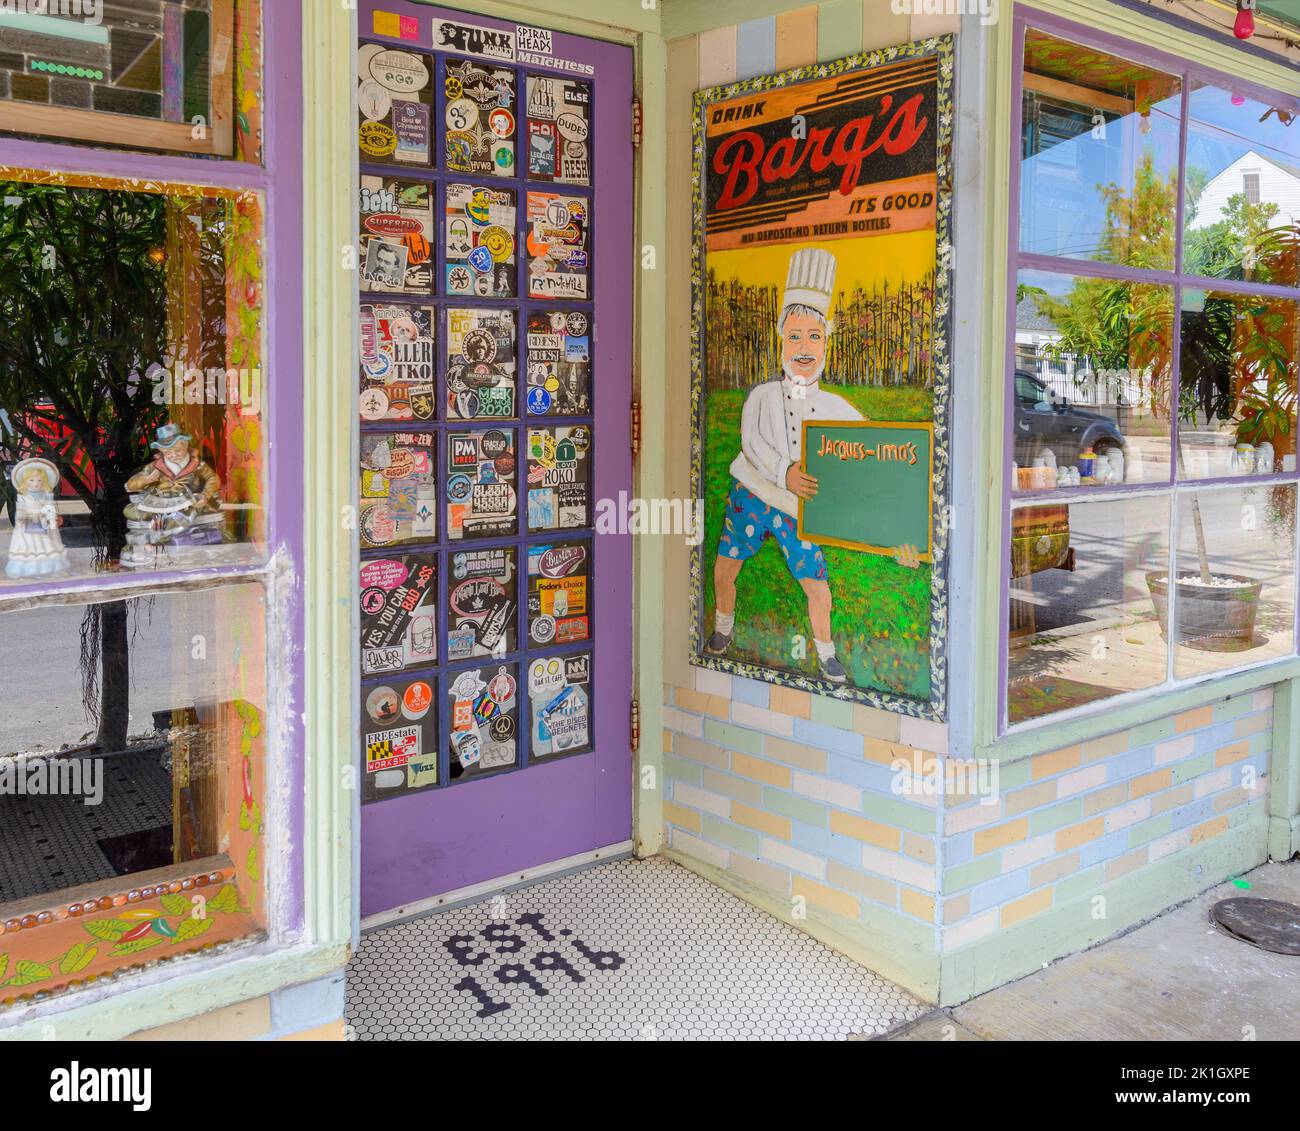 NEW ORLEANS, LA, USA - SEPTEMBER 10, 2022: Funky decor at the entrance to the popular Jaccques-imo's Restaurant on Oak Street Stock Photo